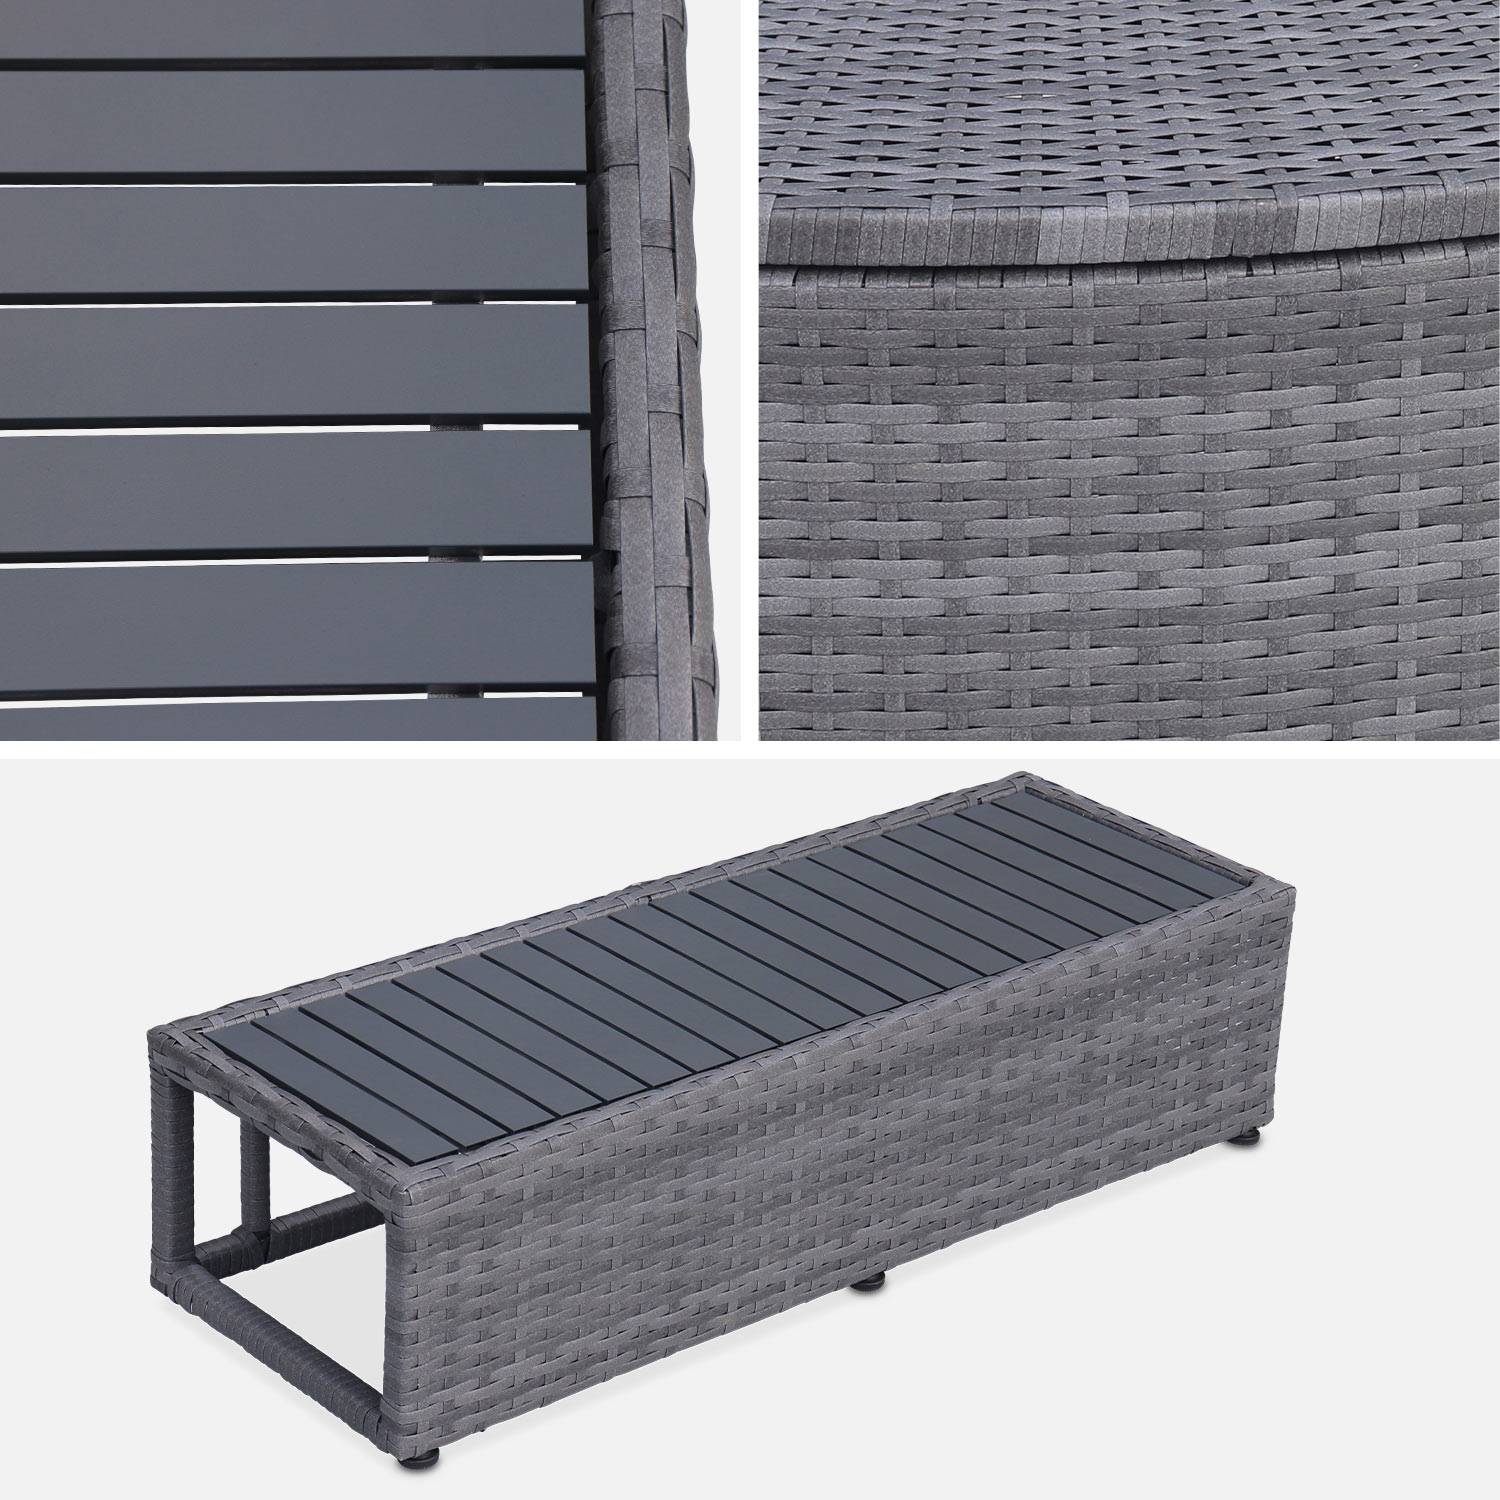 Grey polyrattan surround for square hot tub with cabinet, shelf and footstep,sweeek,Photo6